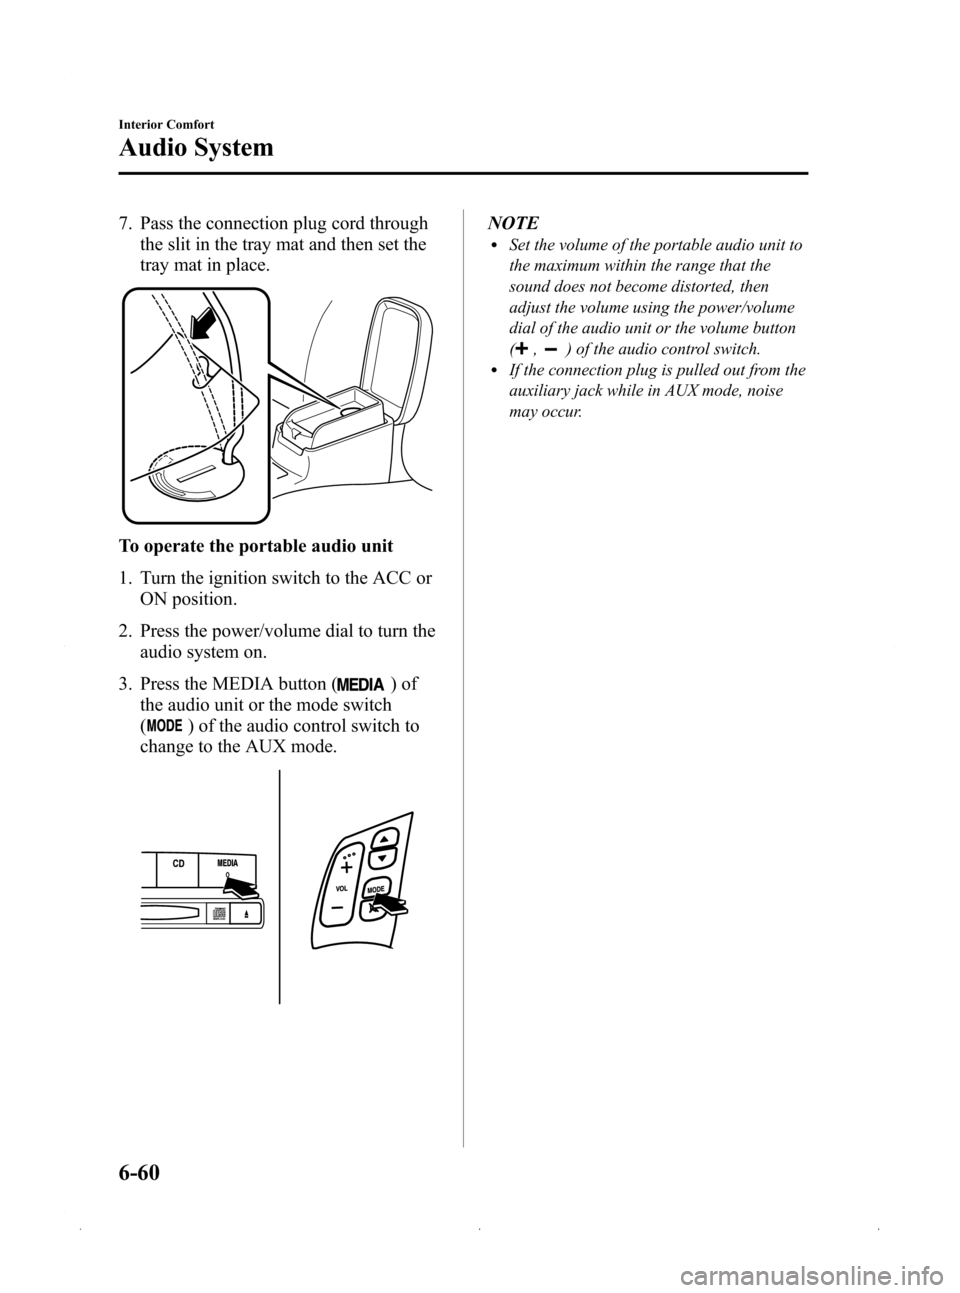 MAZDA MODEL 3 HATCHBACK 2009  Owners Manual (in English) Black plate (244,1)
7. Pass the connection plug cord throughthe slit in the tray mat and then set the
tray mat in place.
To operate the portable audio unit
1. Turn the ignition switch to the ACC or
ON